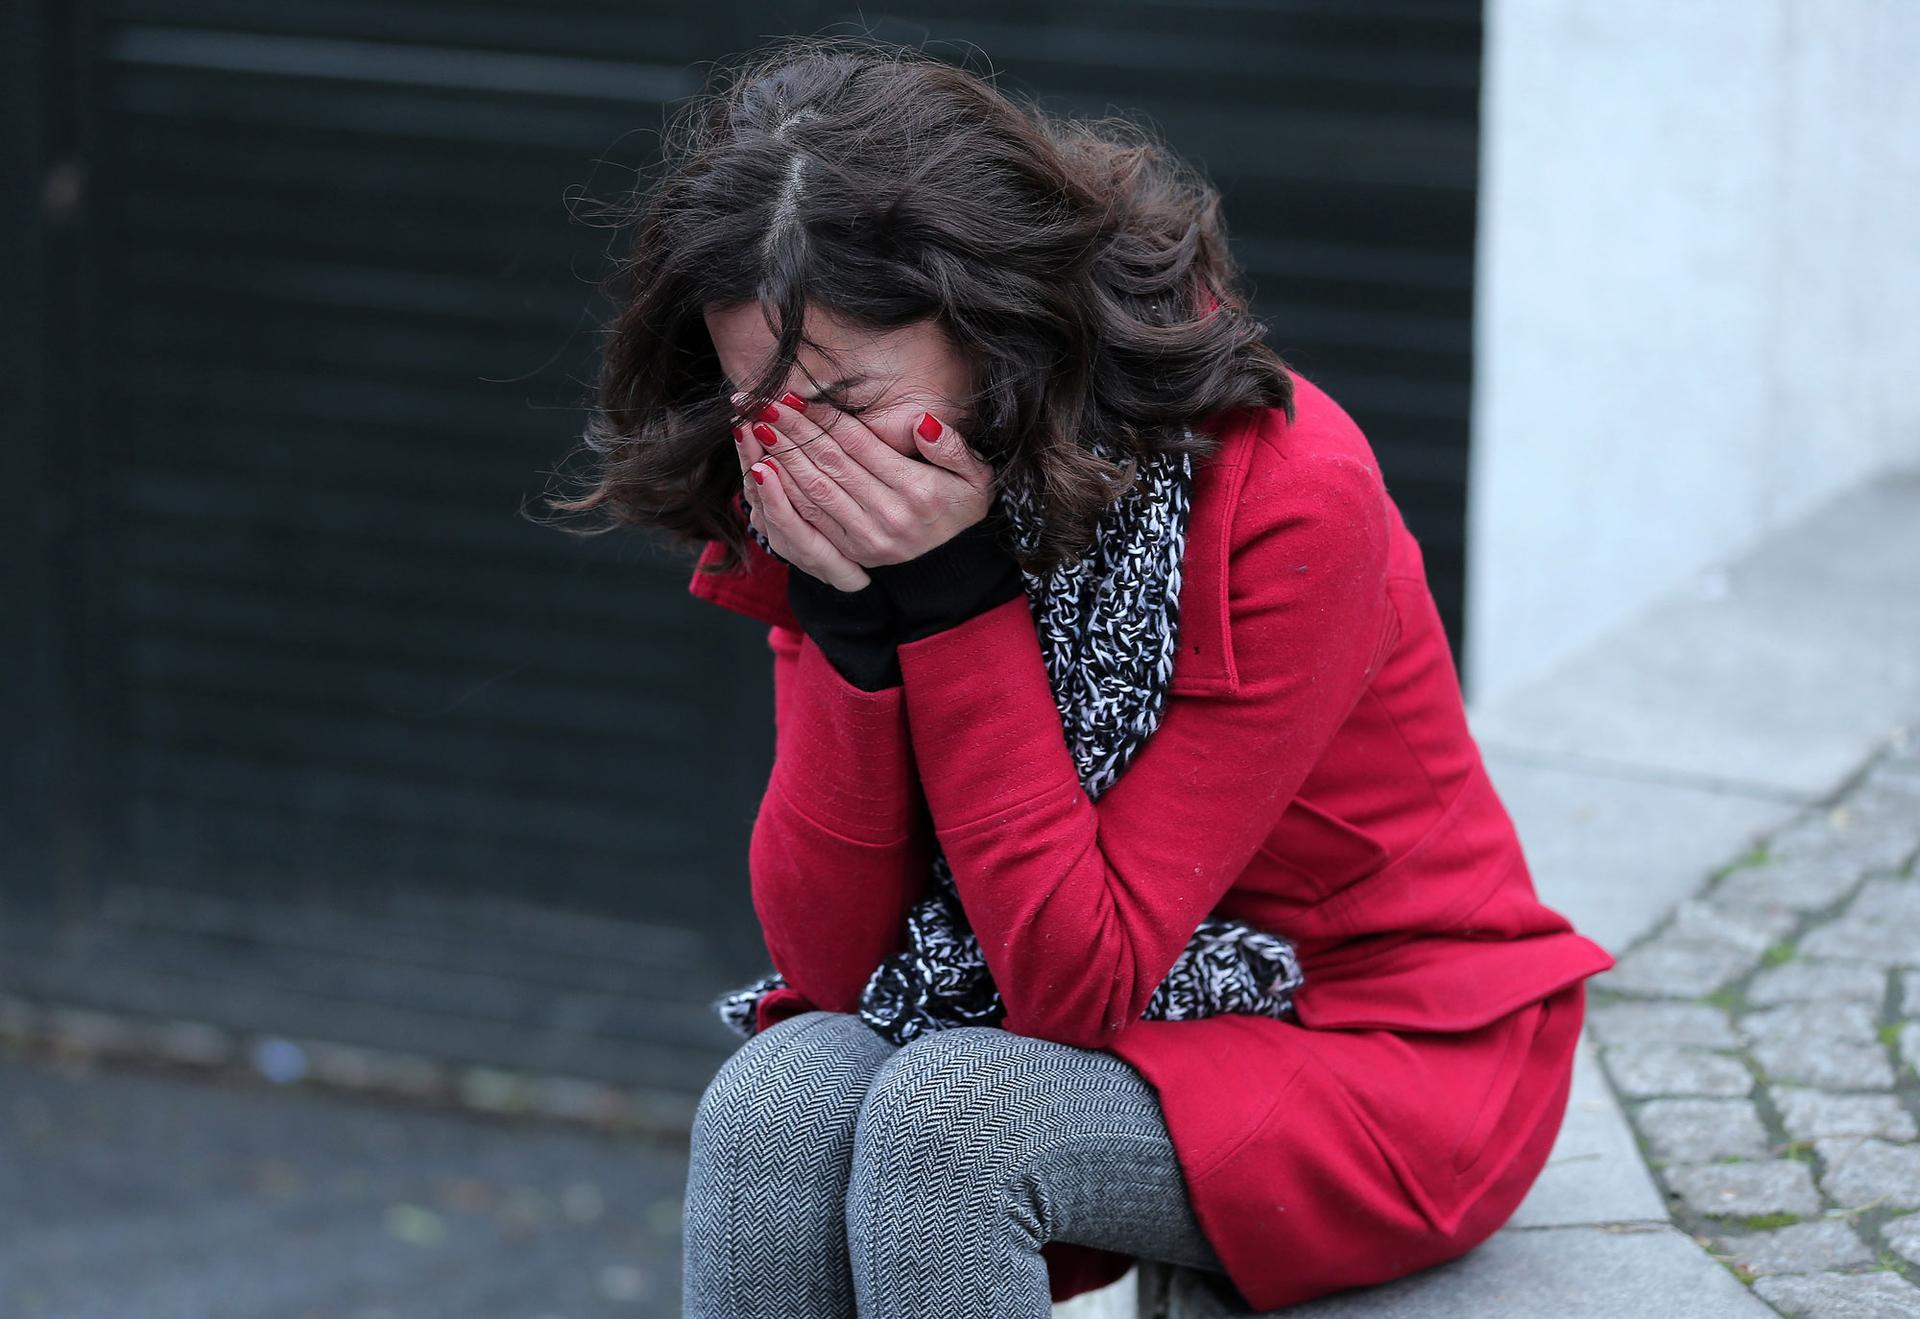 A former employee of the Reina nightclub reacts outside following an attack by a gunman in Istanbul.